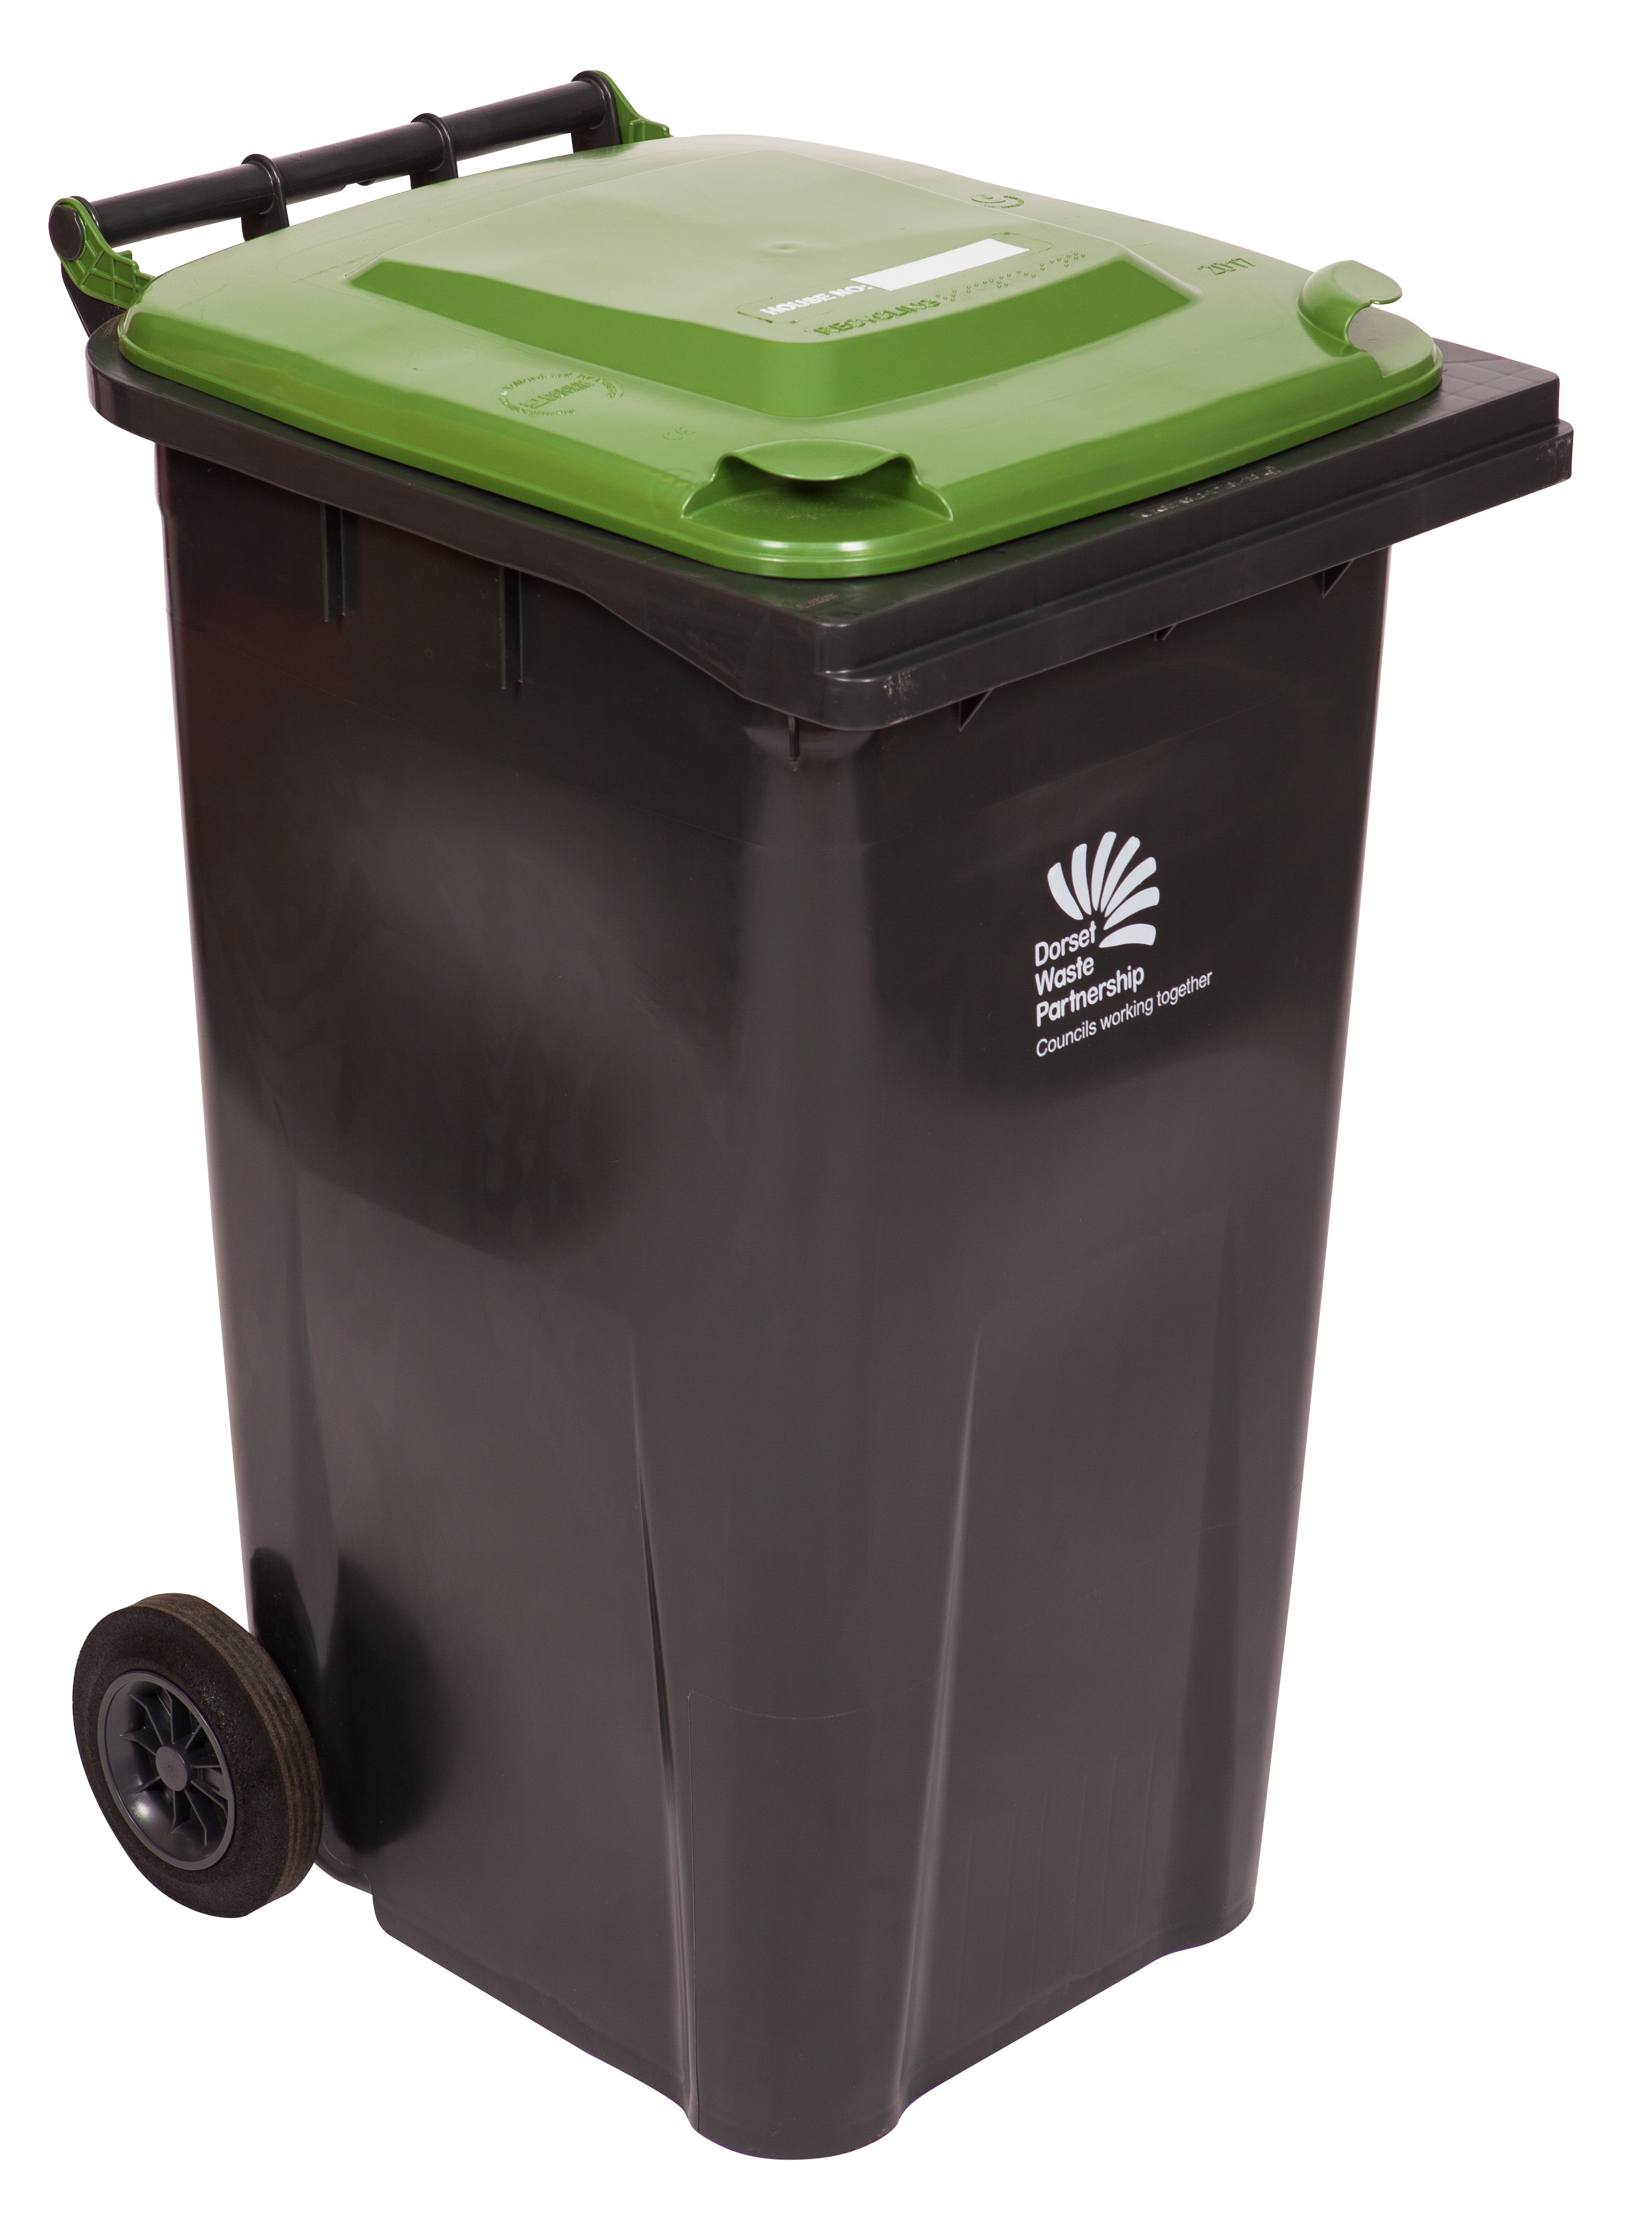 Recycle for Dorset bin - Standard recycling